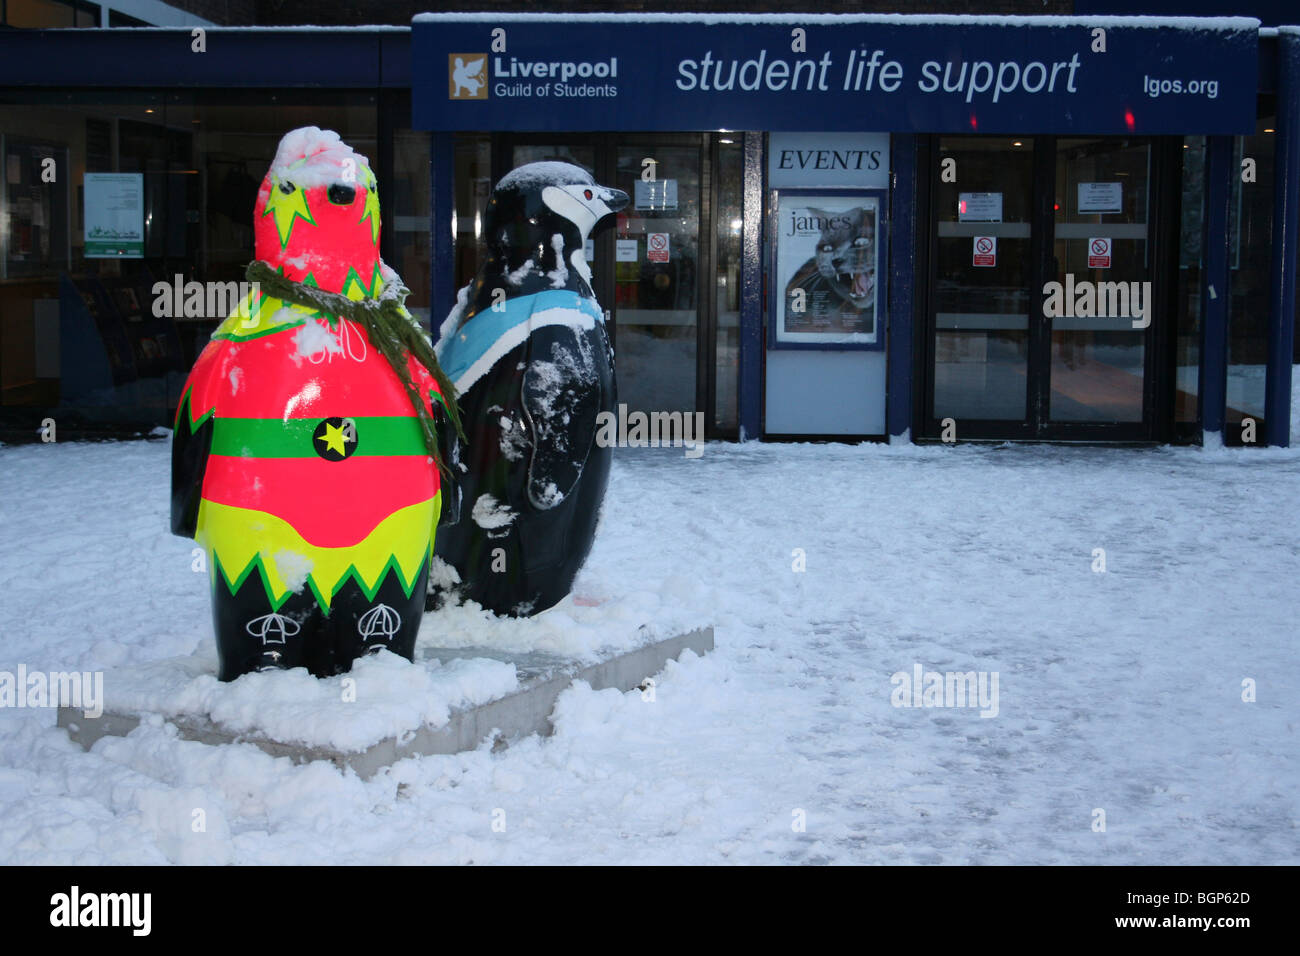 Go Penguins 'El Luchador' & 'Student Penguin' In The Snow Outside Liverpool University's Guild of Students, UK Stock Photo